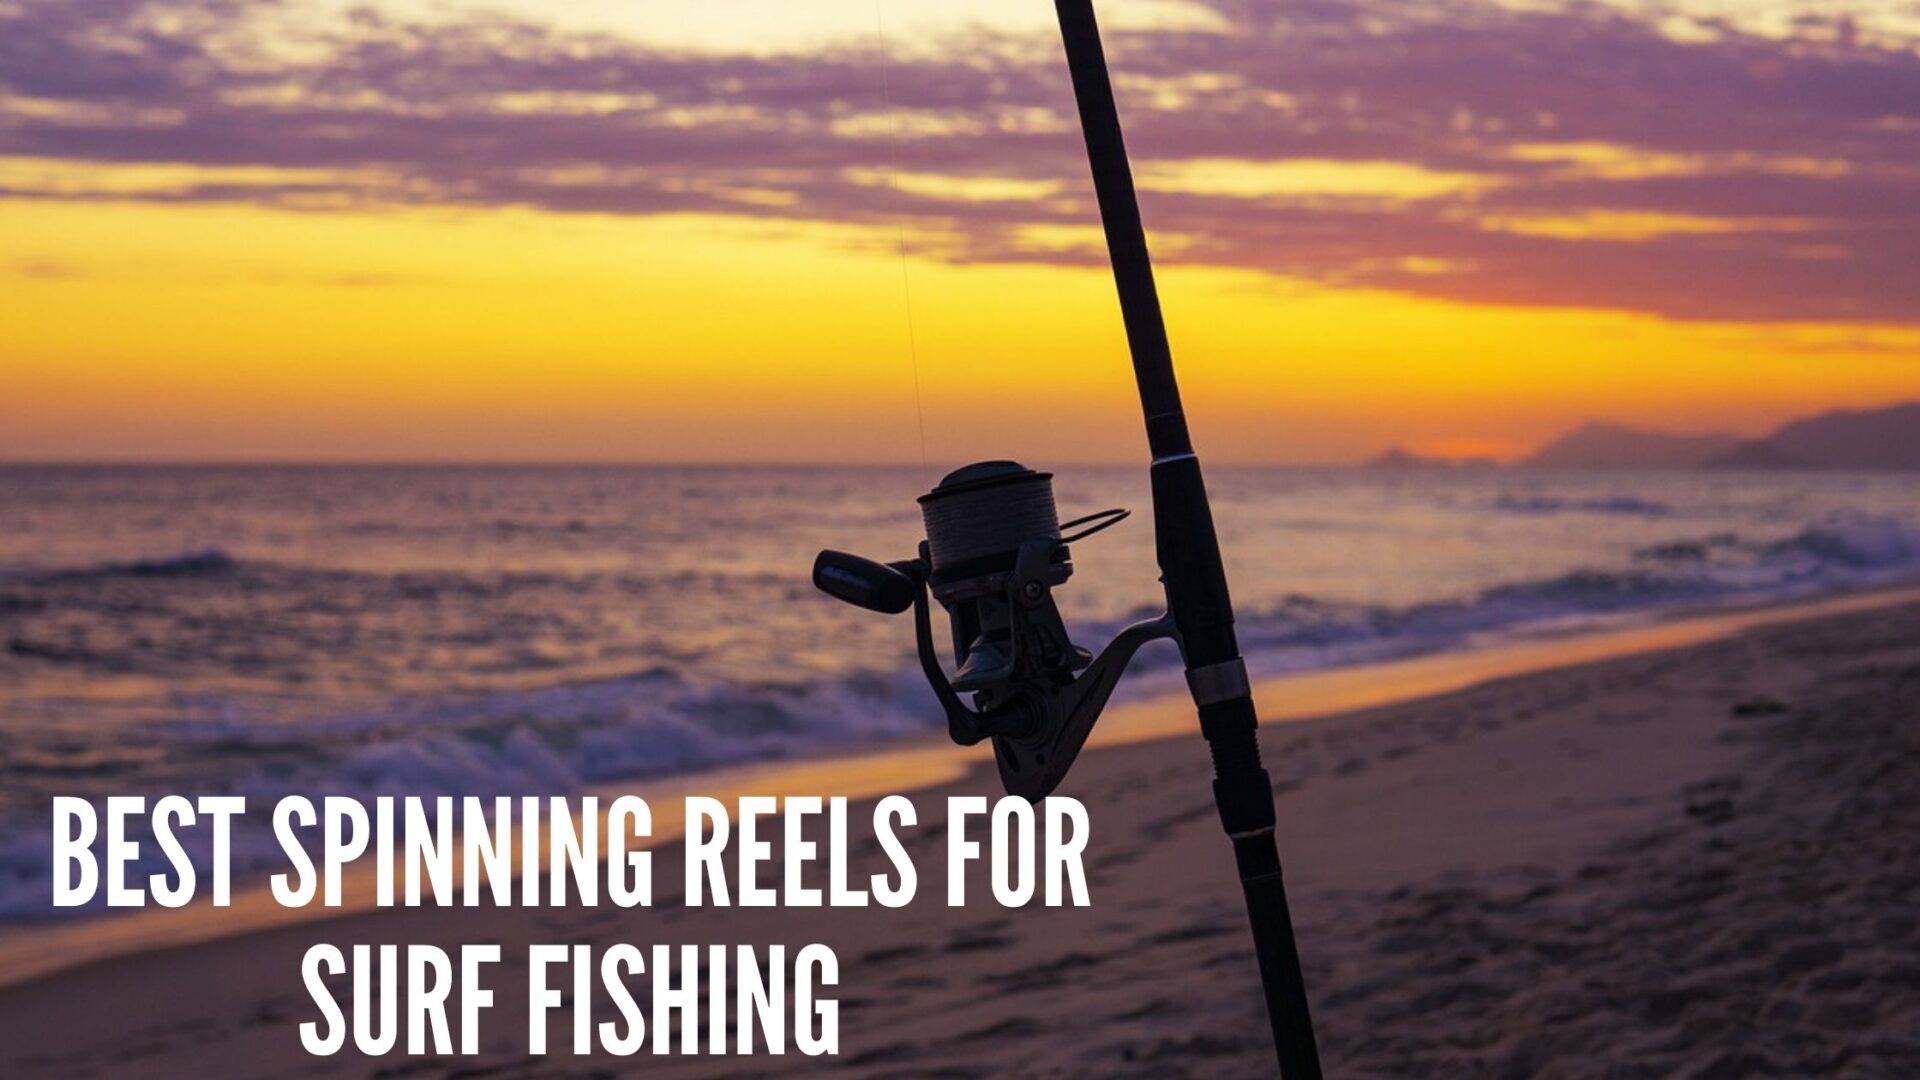 The 5 Best Spinning Reels for Surf Fishing: Take Your Surf Fishing